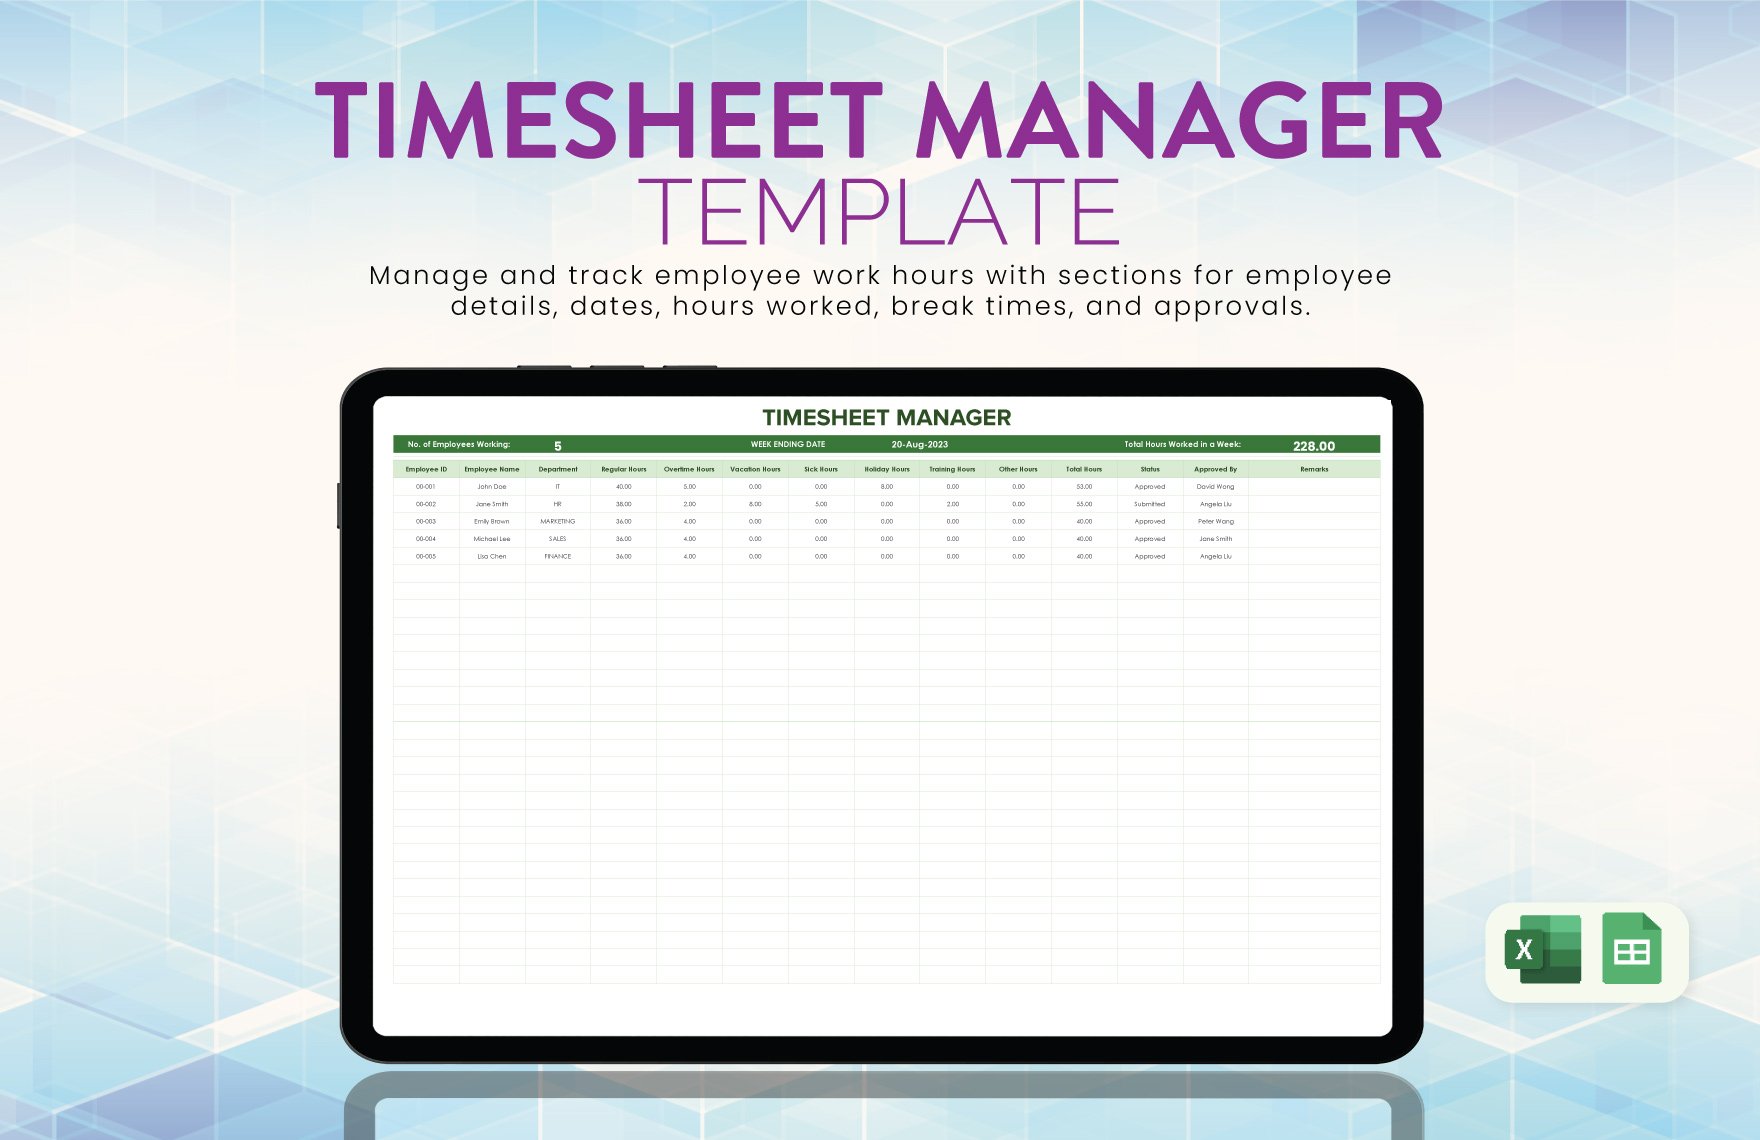 Timesheet Manager Template in Excel, Google Sheets